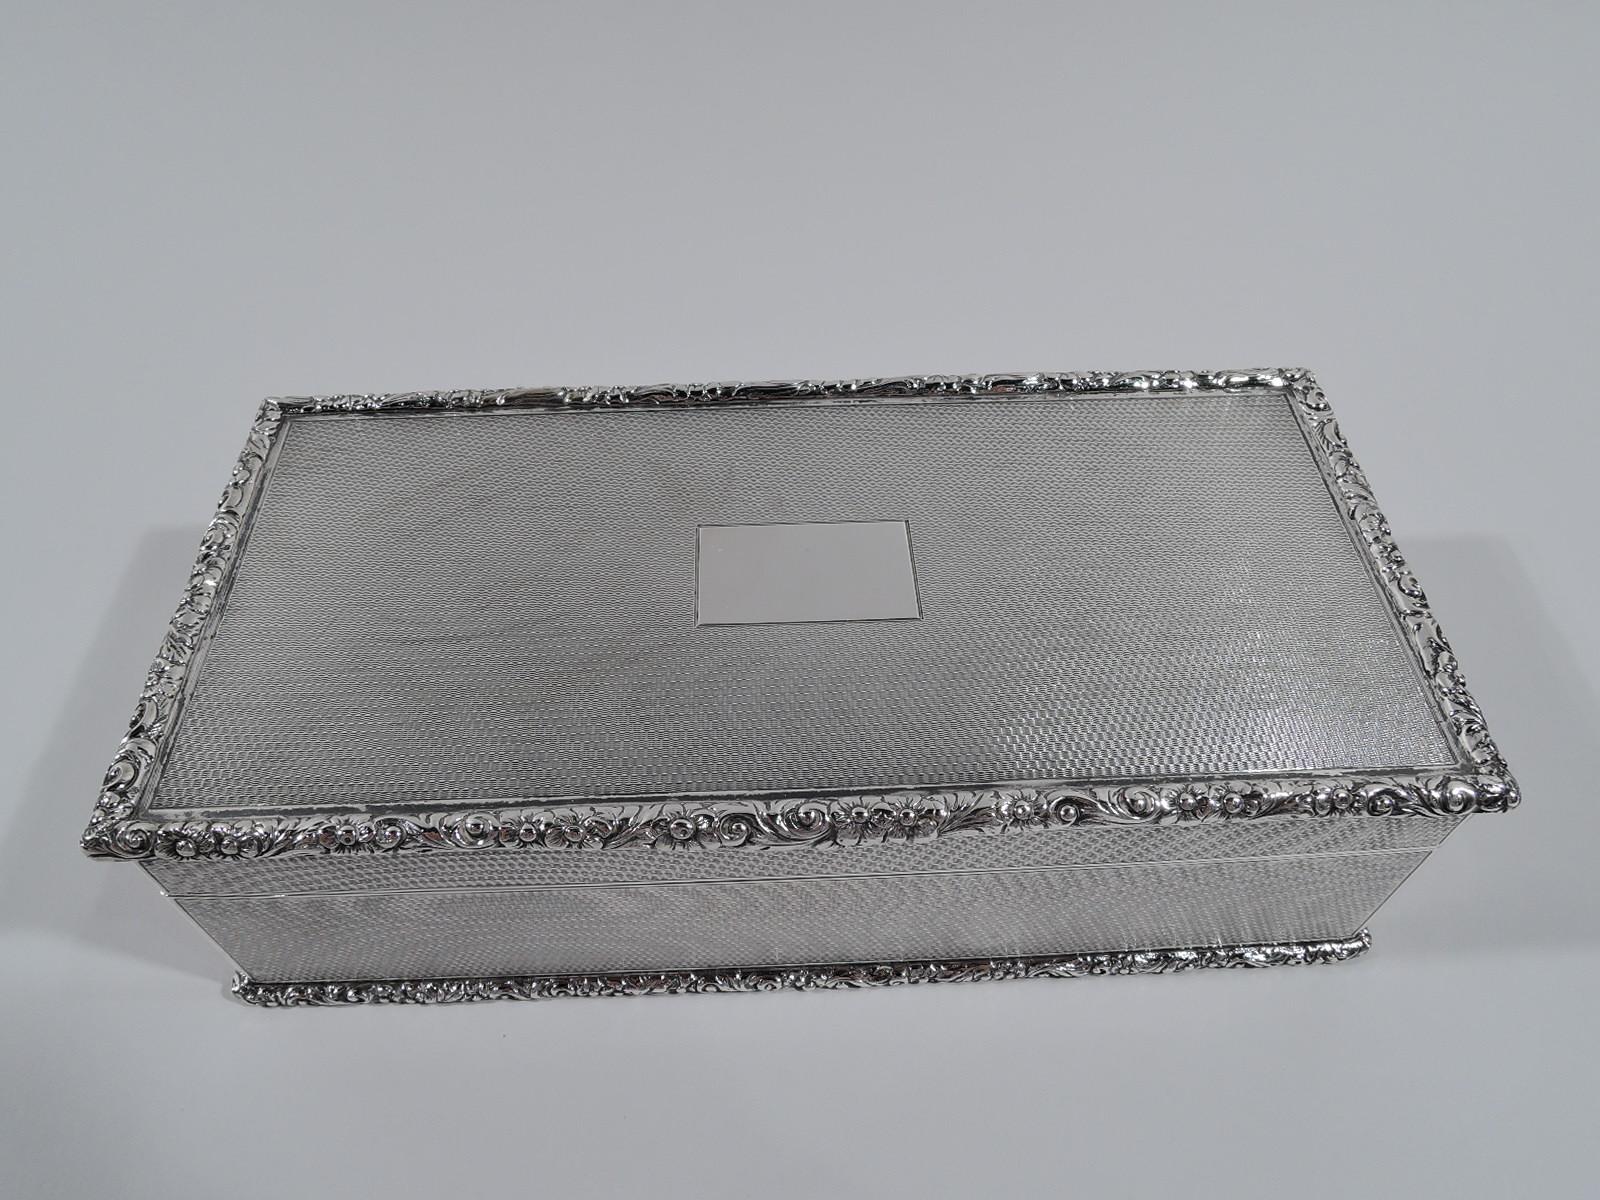 George V sterling silver box. Made by Richard Comyns in London in 1930. Rectangular with hinged cover. Allover engine-turned wave ornament. Rim and base have applied and tooled flower-and-scroll rim. Cover top has plain rectangular frame (vacant).